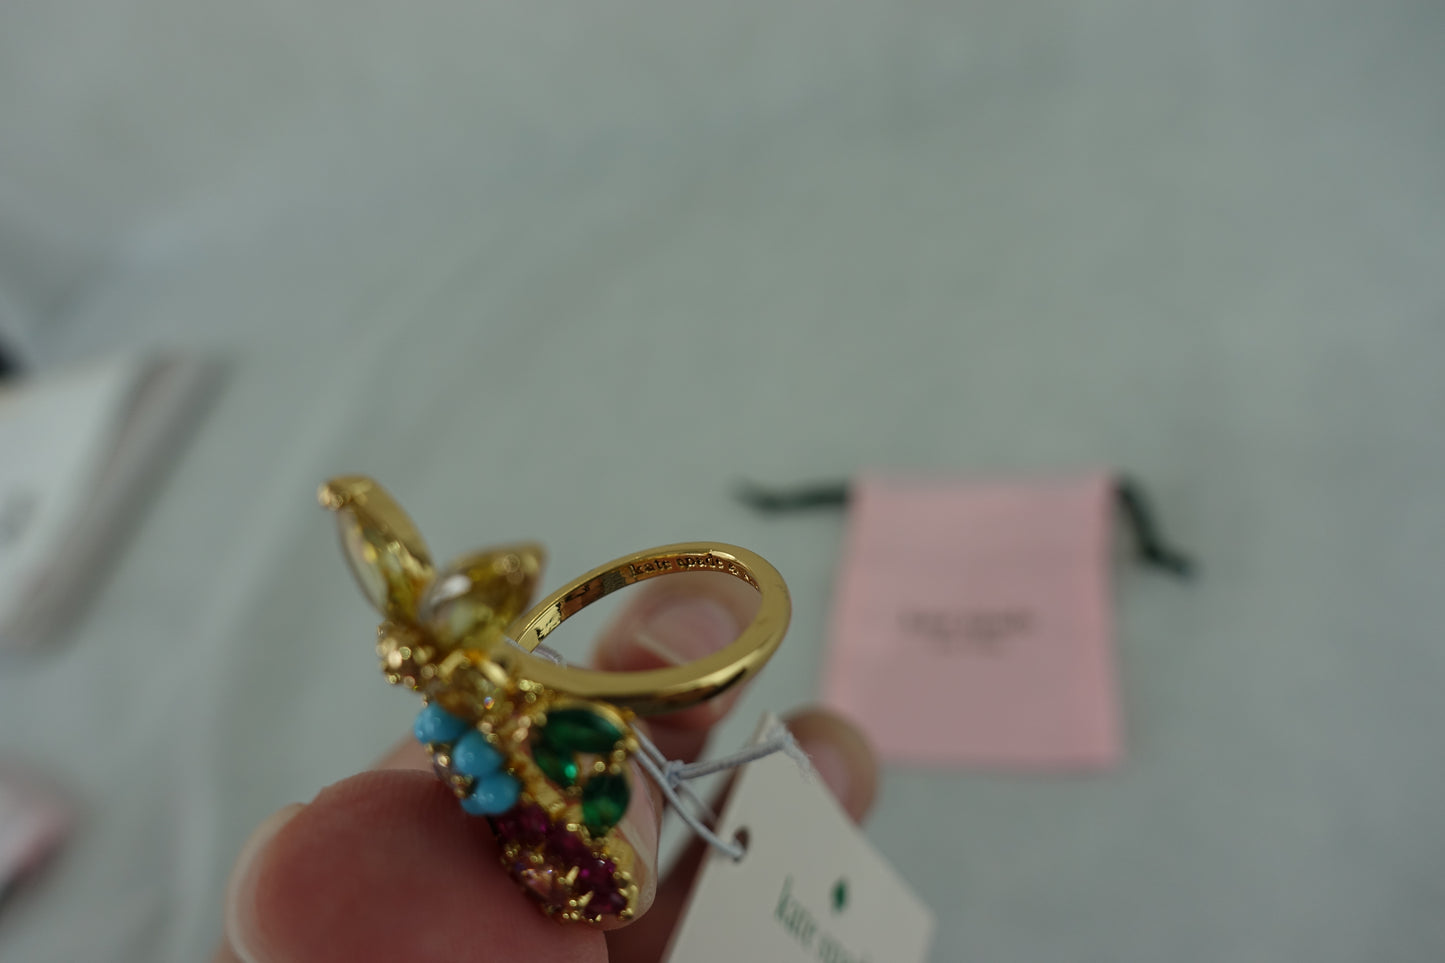 Anillo Kate Spade New Bloom Flower Ring